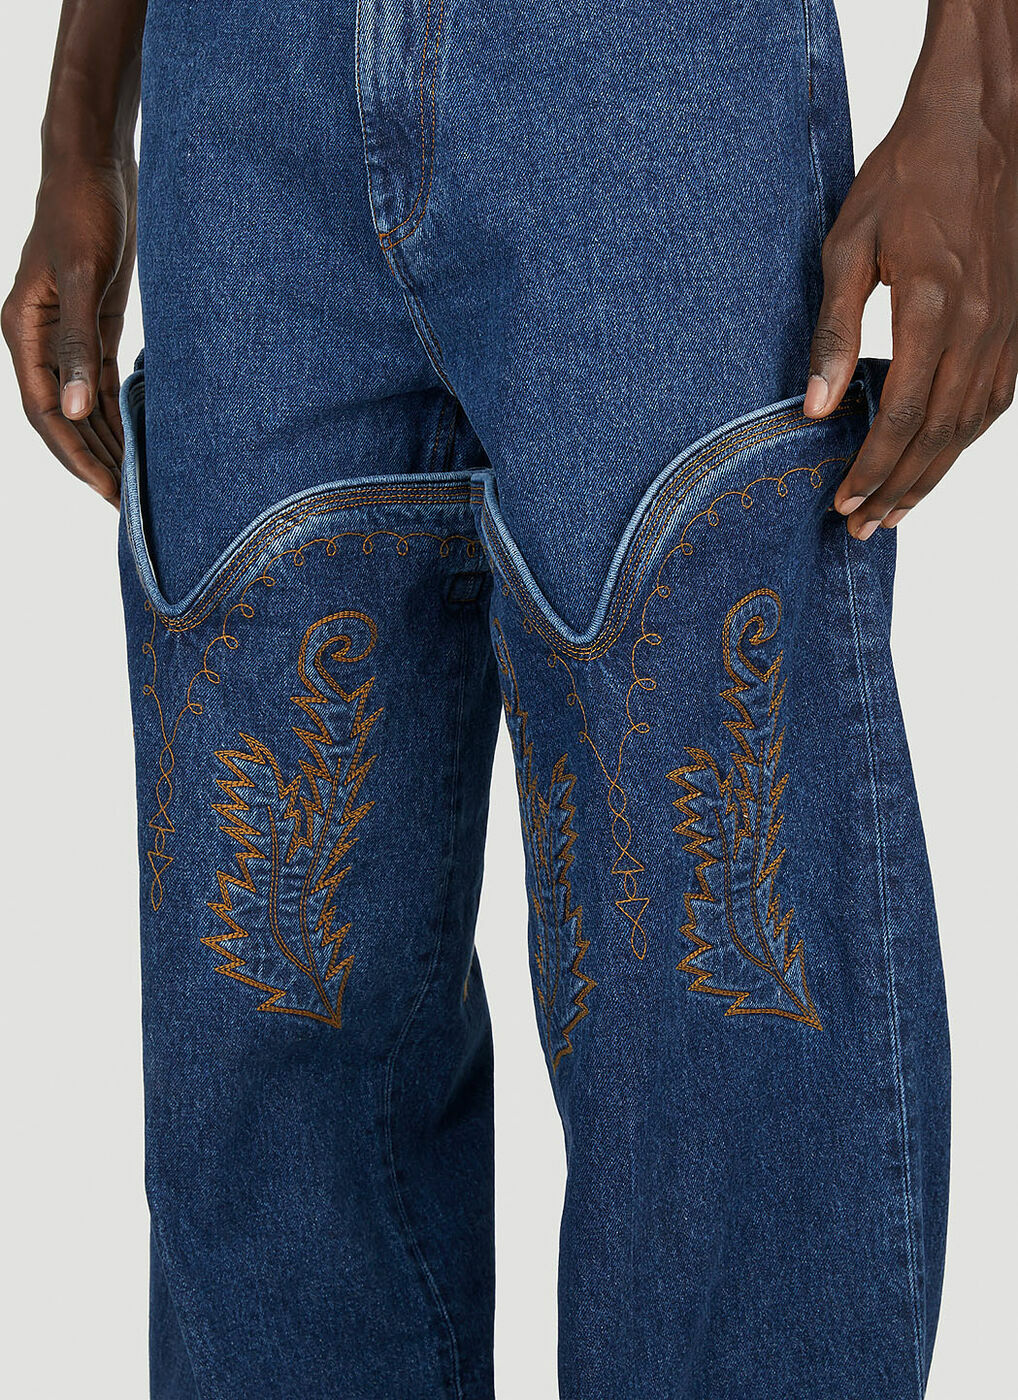 Y/Project - Cowboy Cuff Jeans in Blue Y/Project